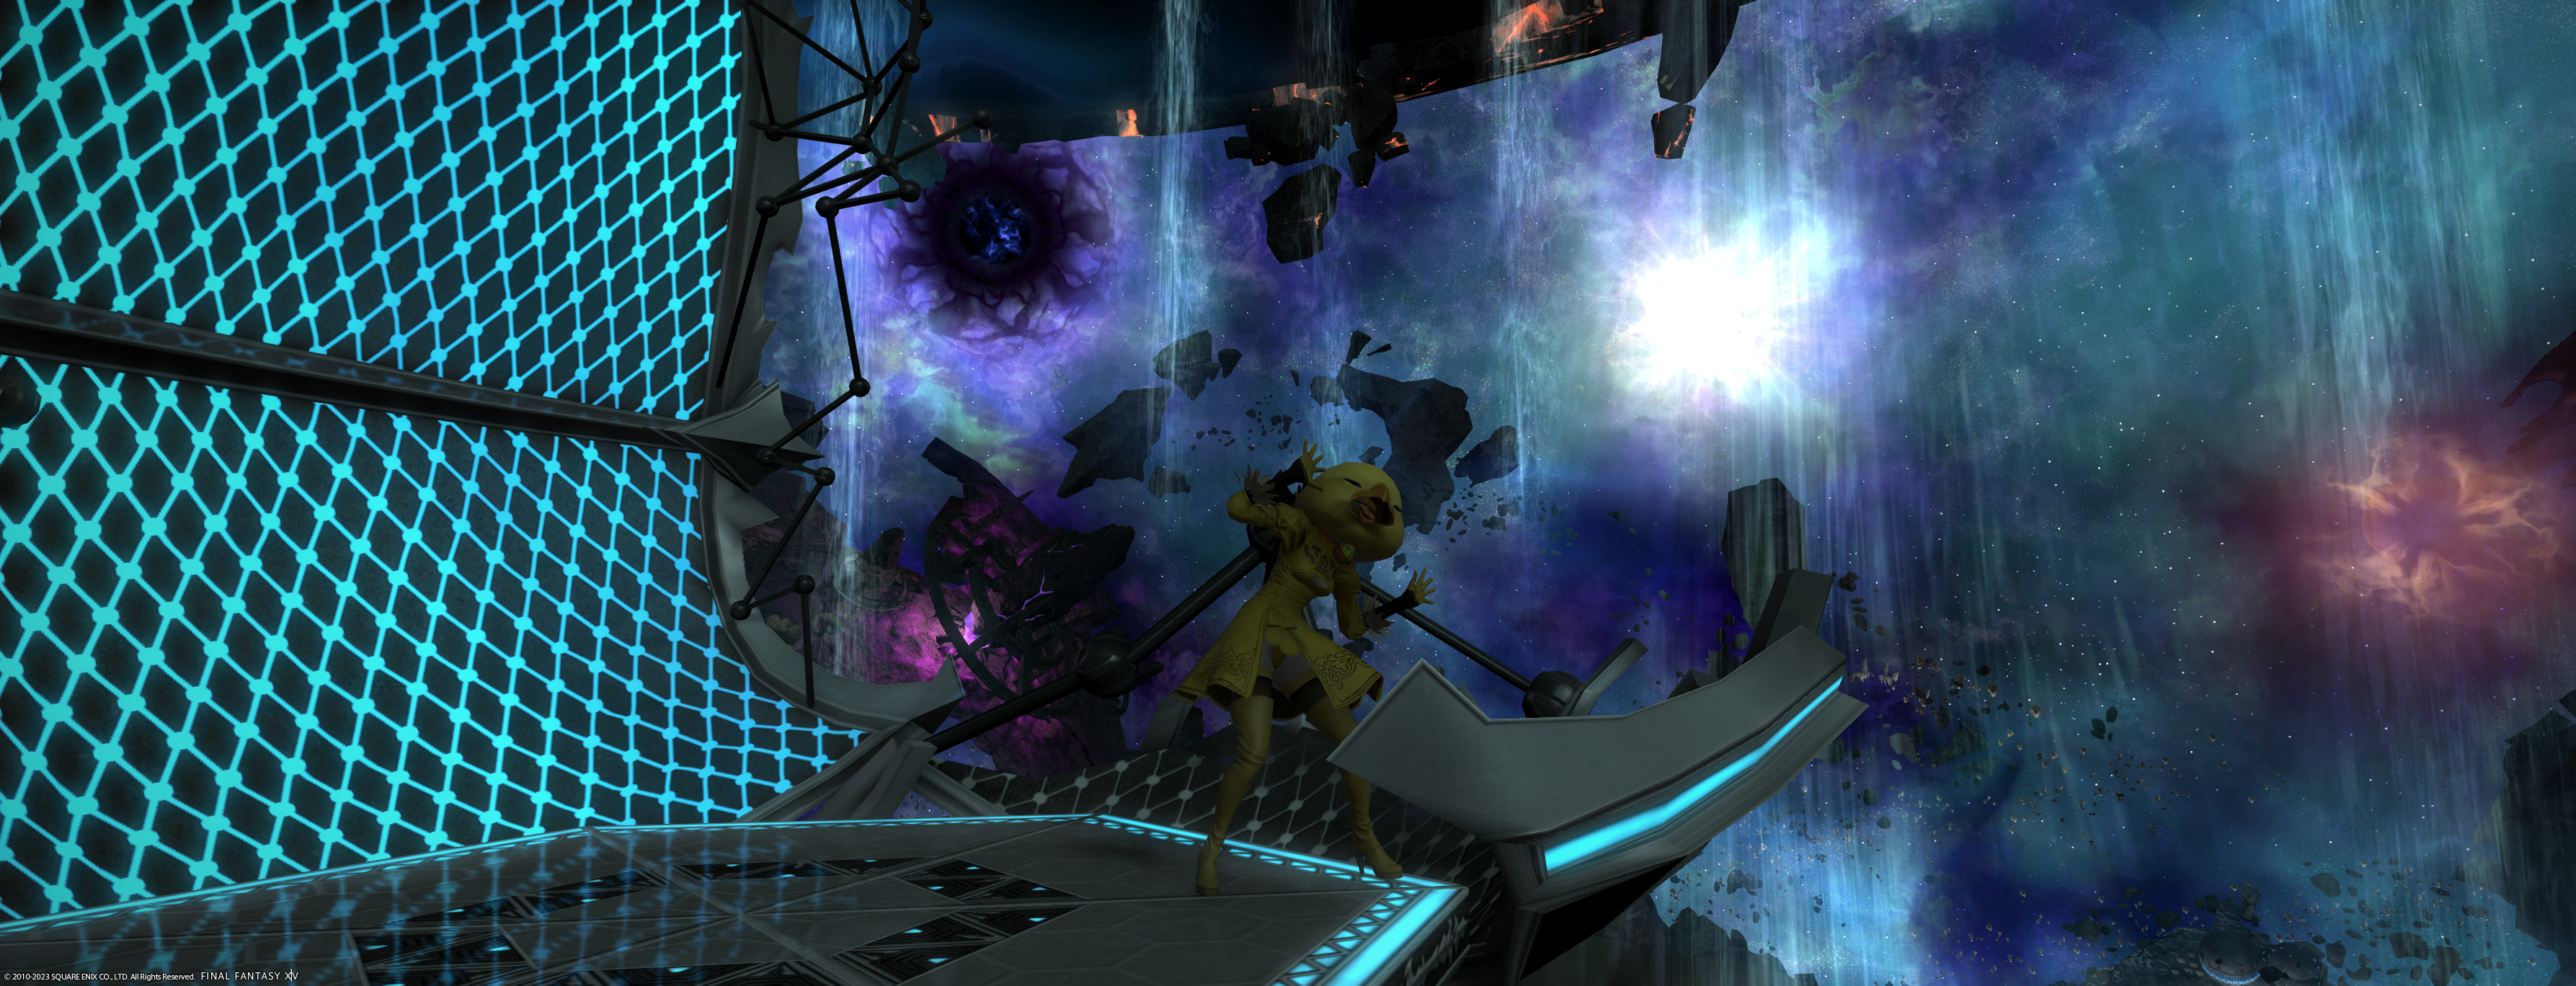 A screenshot from FFXIV. It depects a character dressed as a chocobo standing on an island in outer space, dancing.